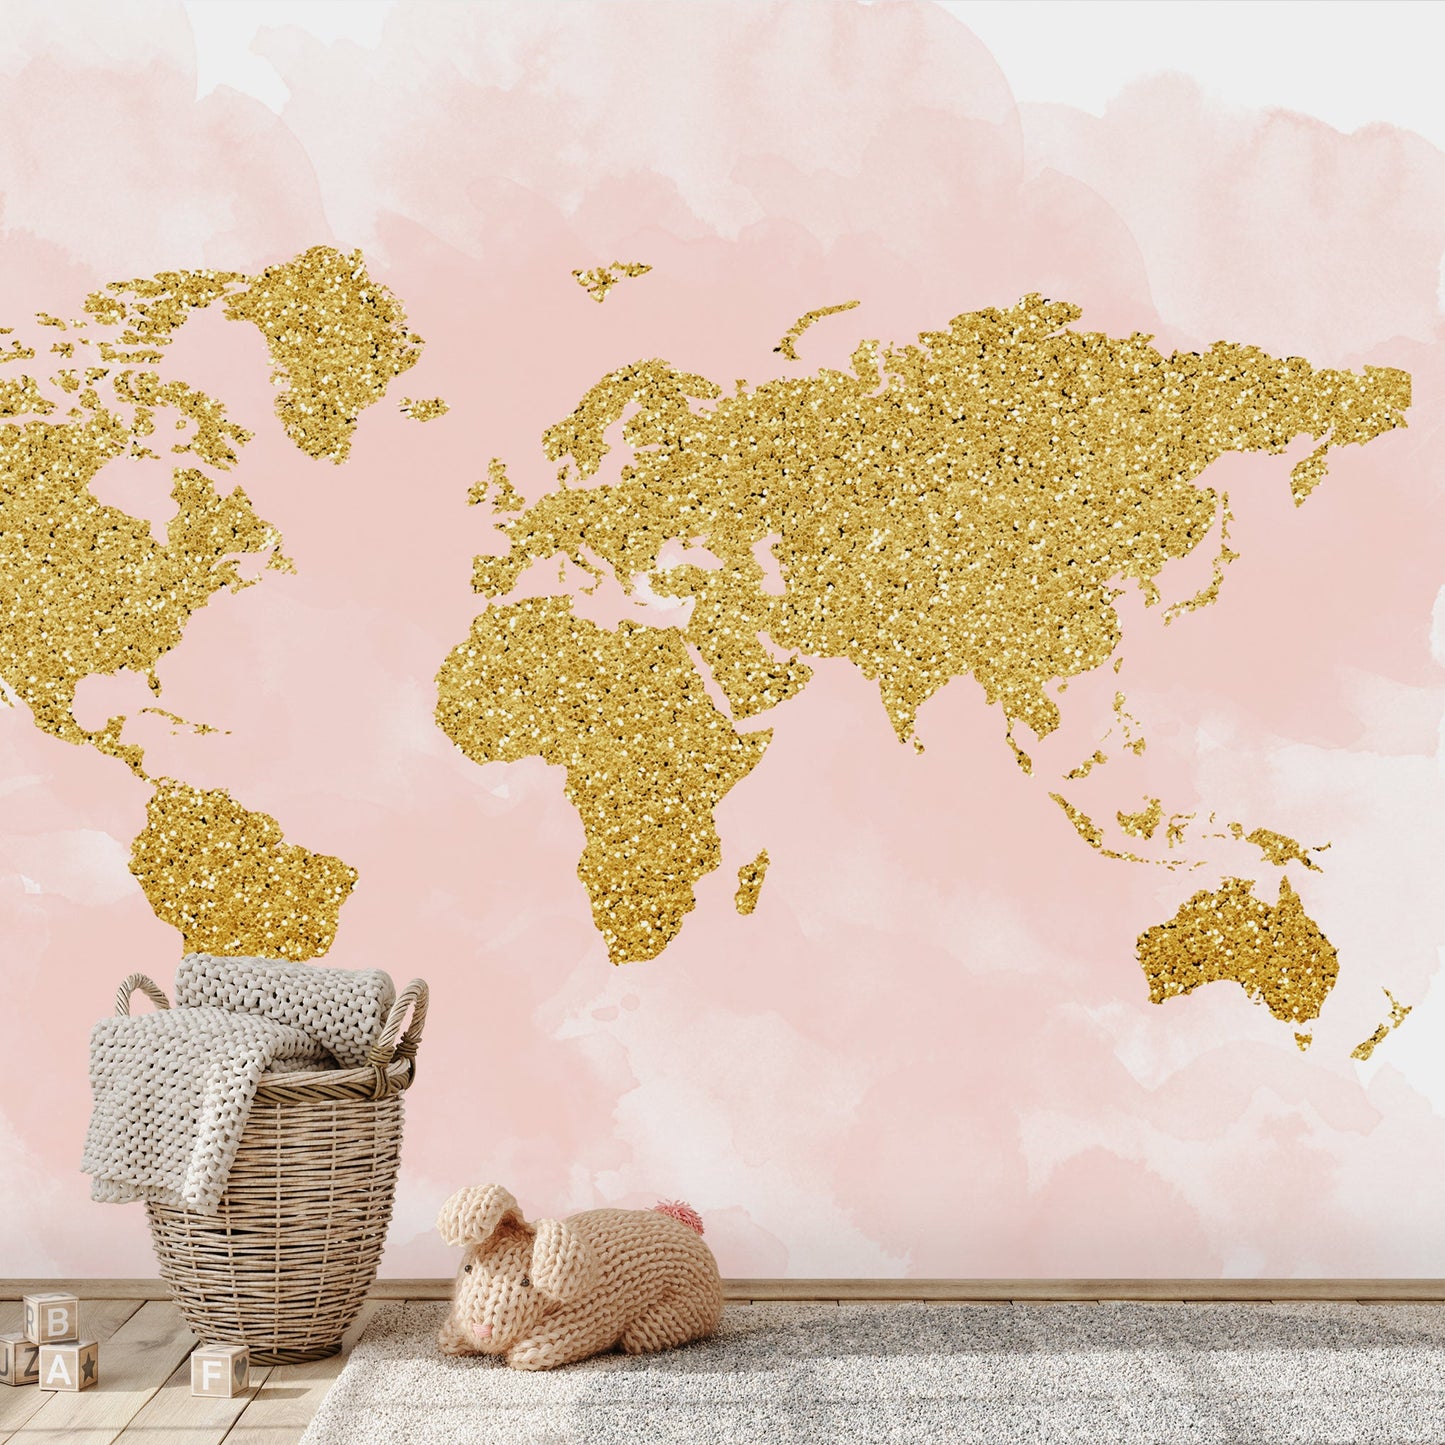 Peel & Stick Wall Mural - World Map 4 By Peach & Gold